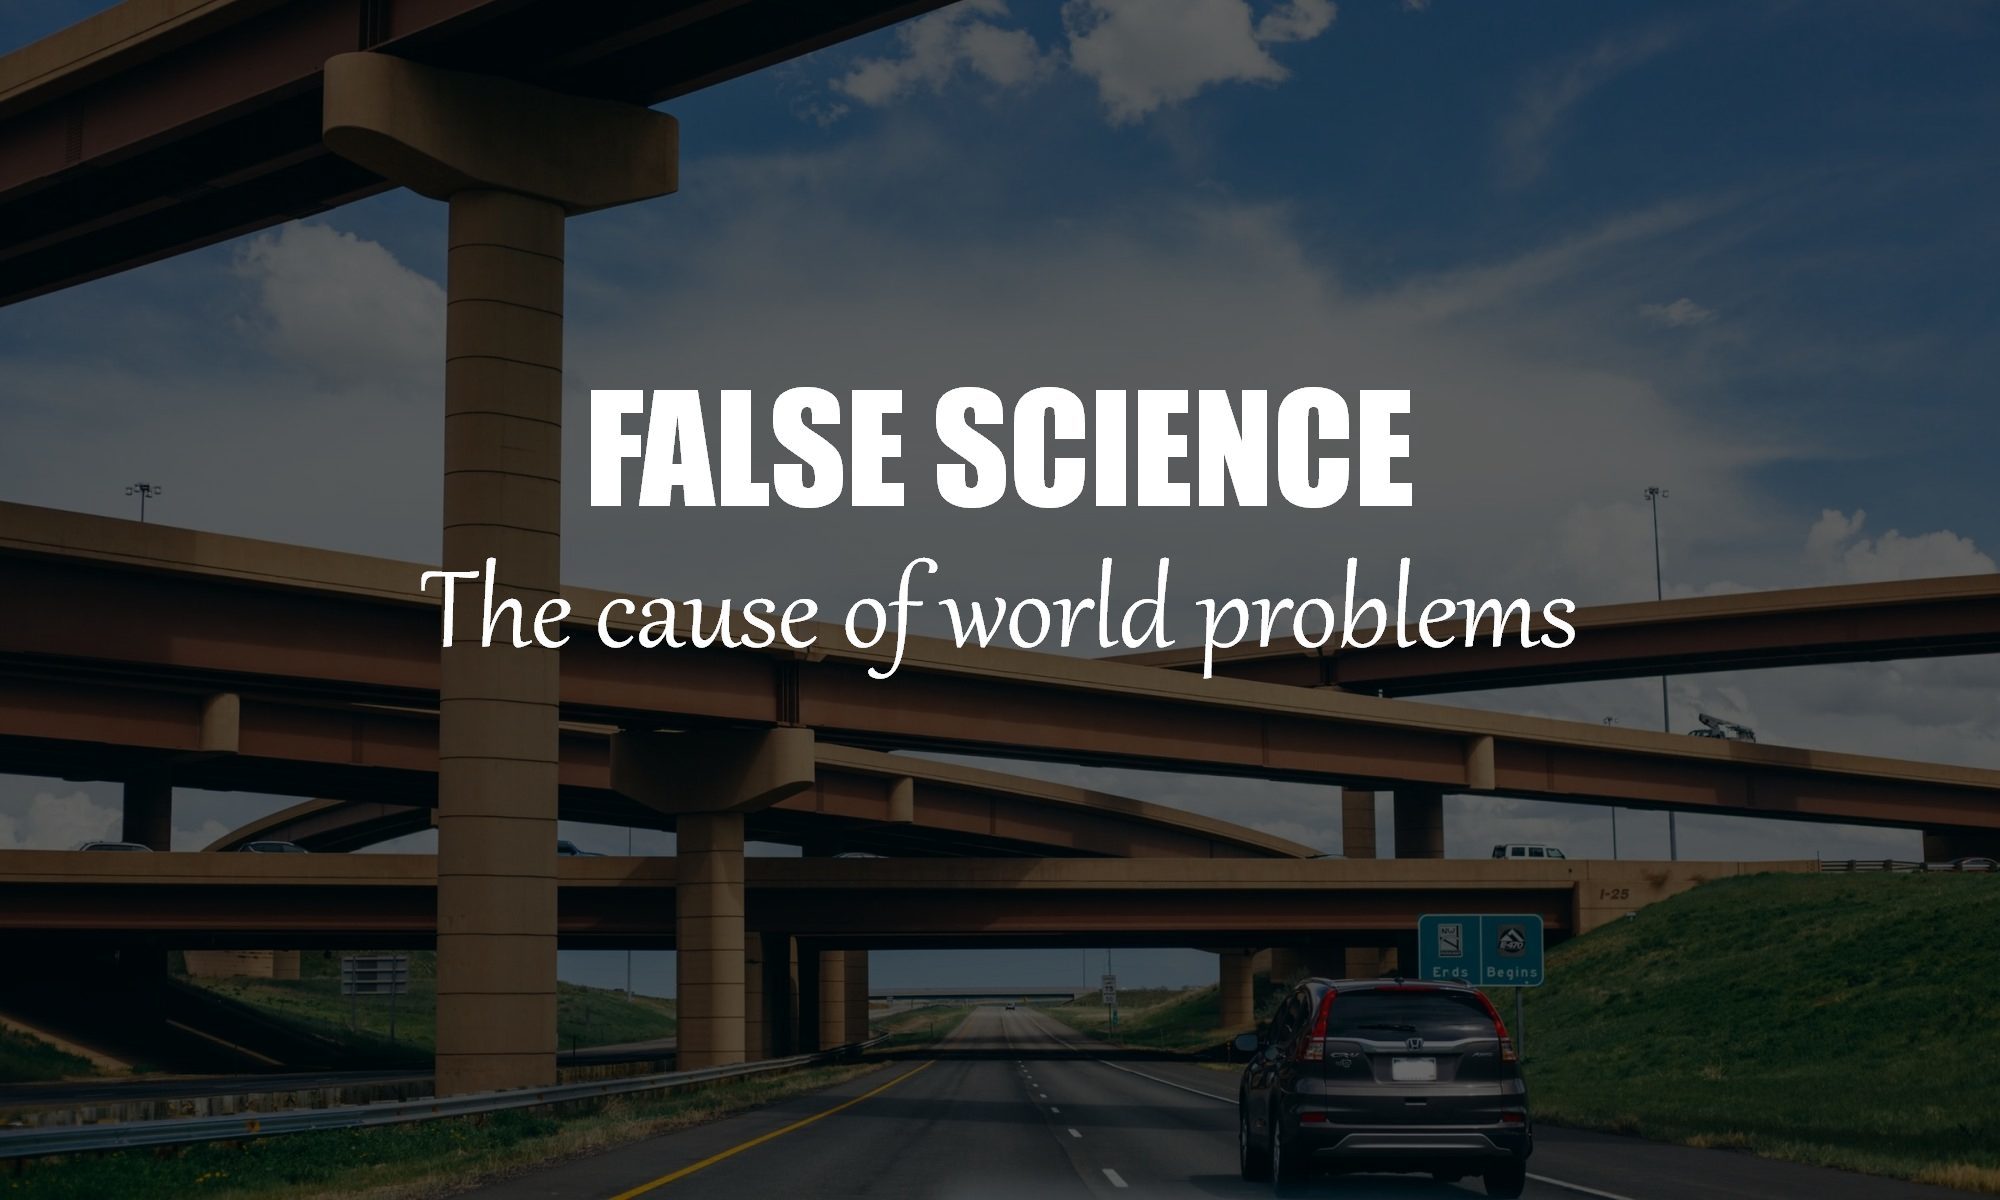 is-scientific-worldview-false-how-are-materialism-darwinism-wrong-cause-of-incorrect-science-my-our-all-world-problems